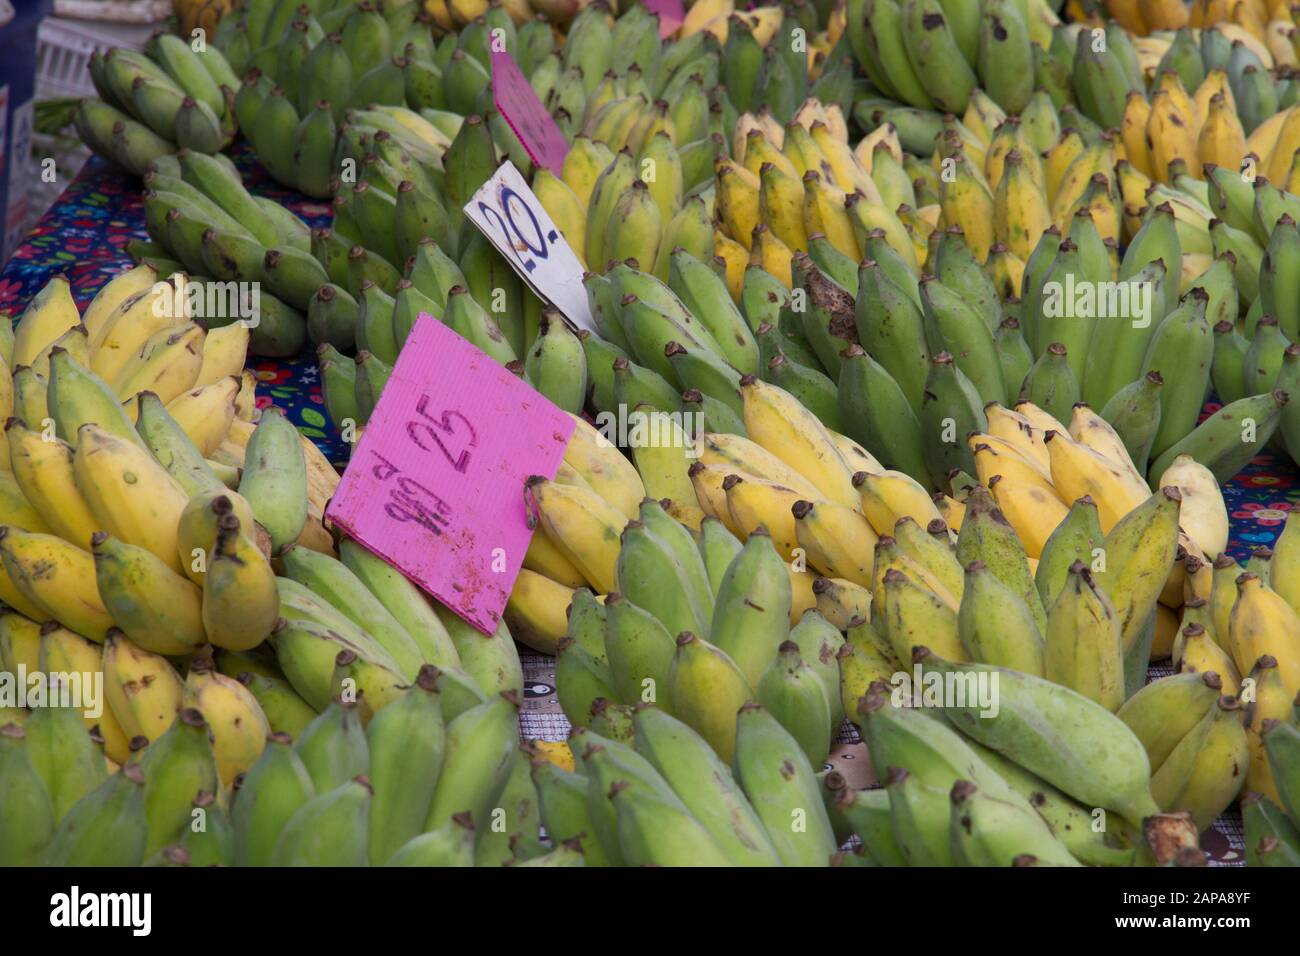 Bananas dshowed for sale price tags in Chiang Mai Market Thailand Stock Photo